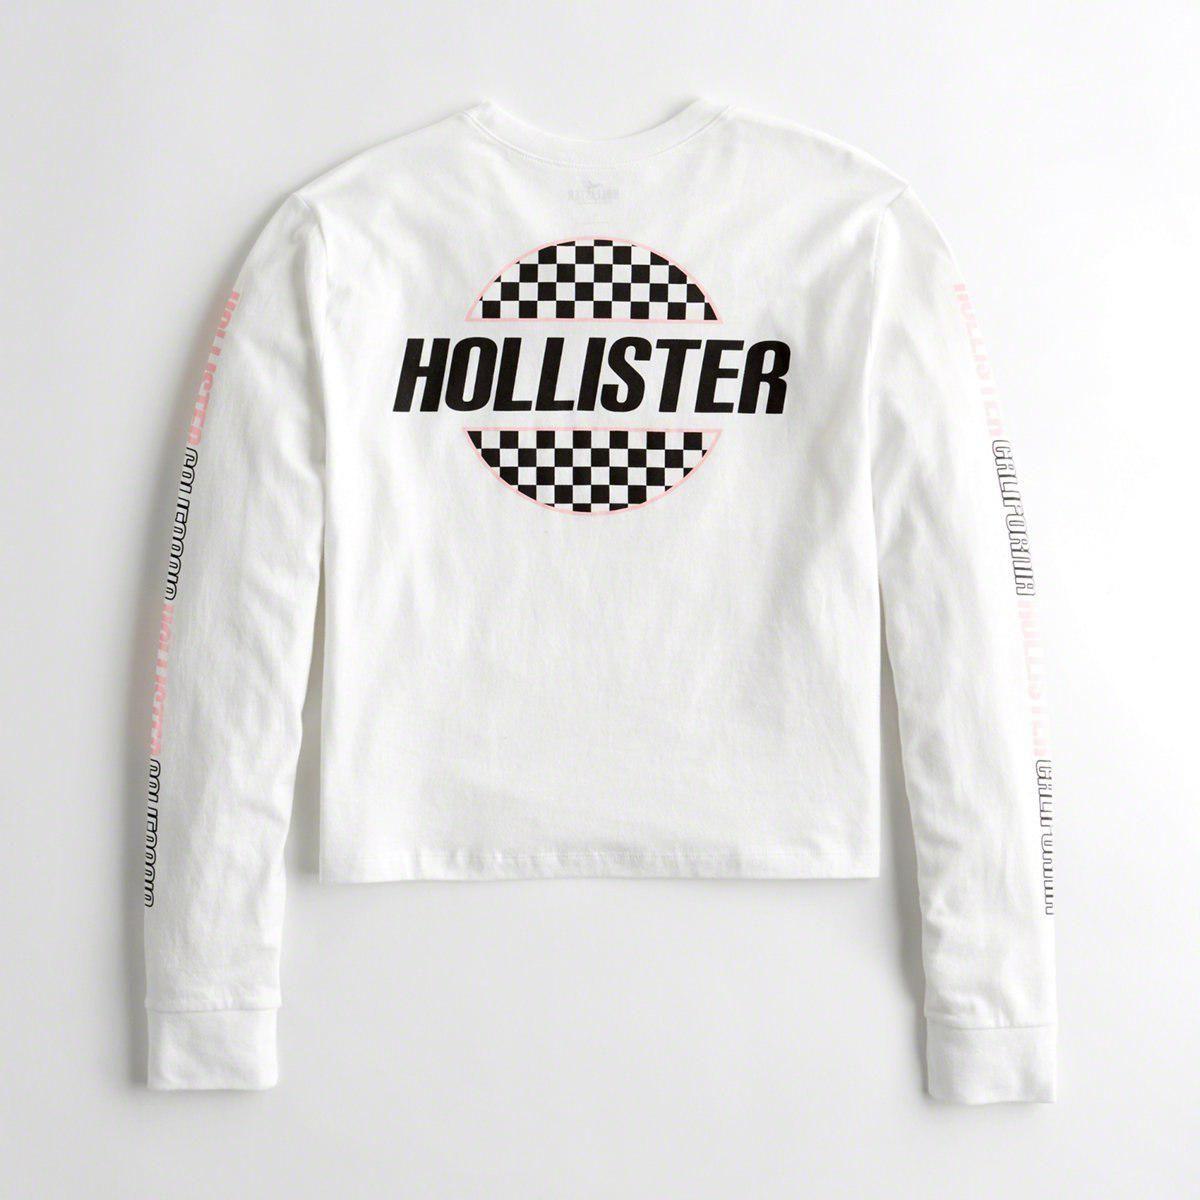 Black and White Checkerboard Logo - Lyst - Hollister Girls Checkerboard Logo Graphic Tee From Hollister ...